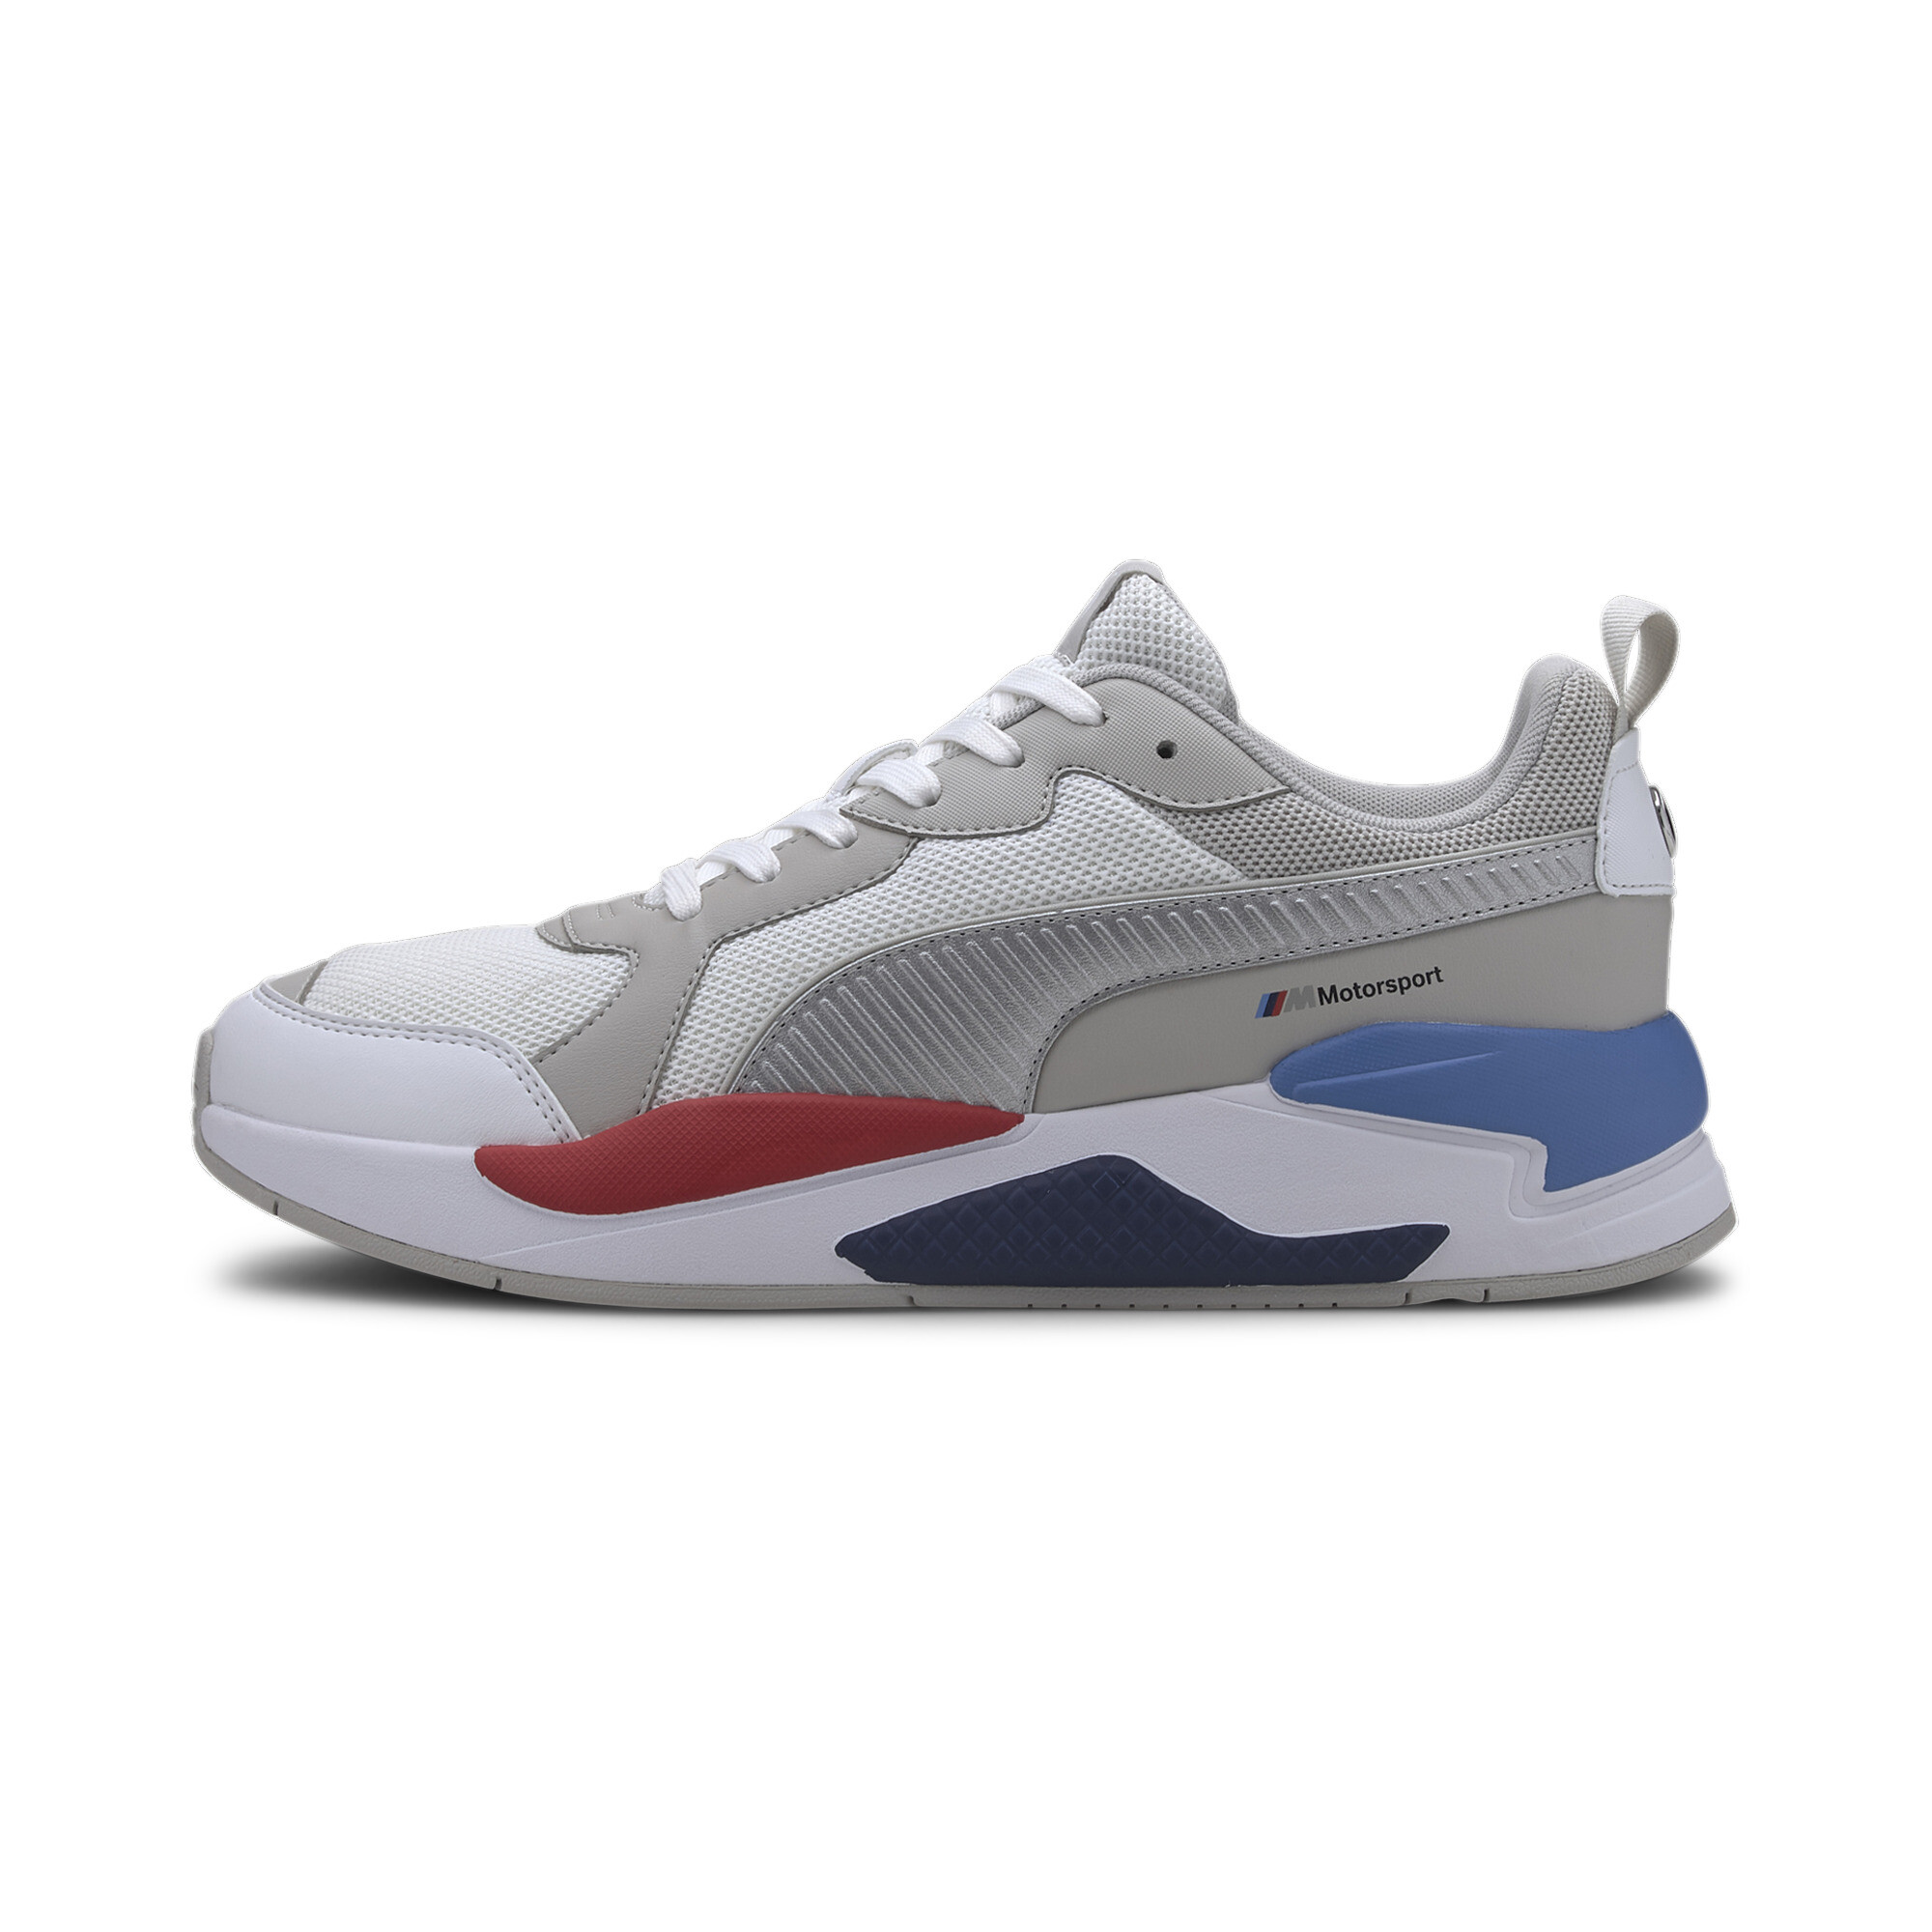 puma bmw shoes price in south africa